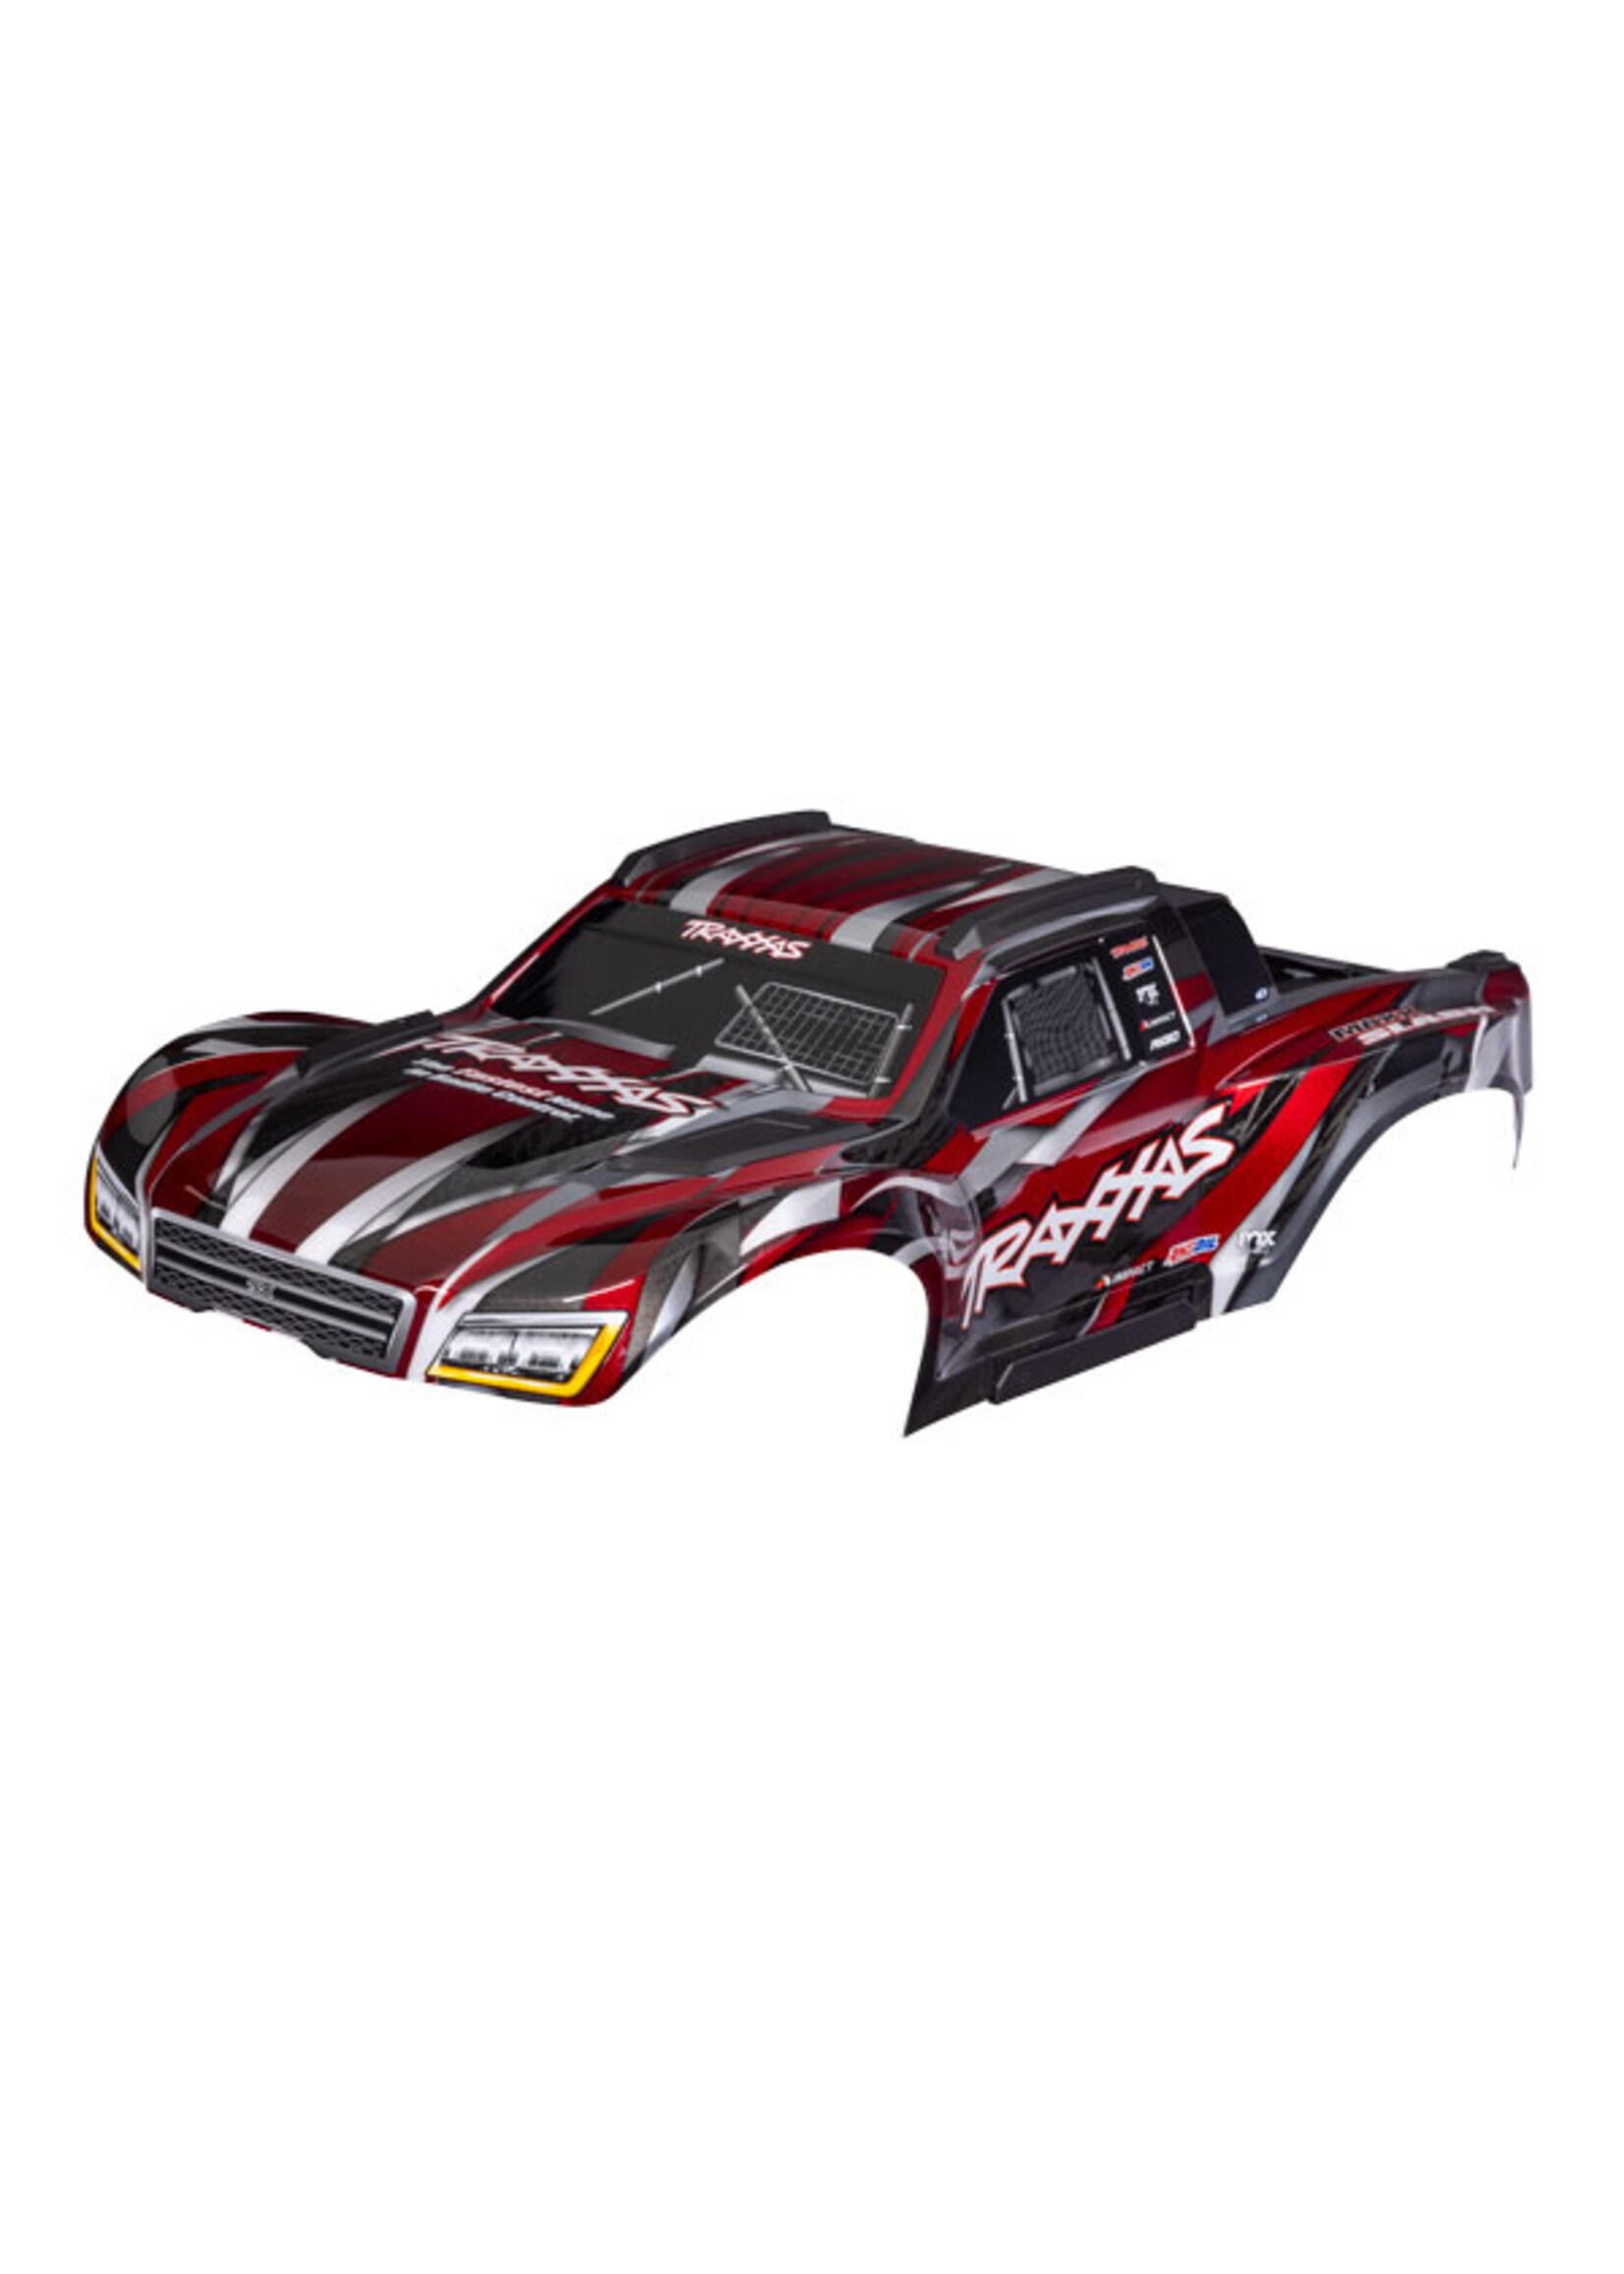 Traxxas 10211-RED - Maxx Slash Body With Decals - Red